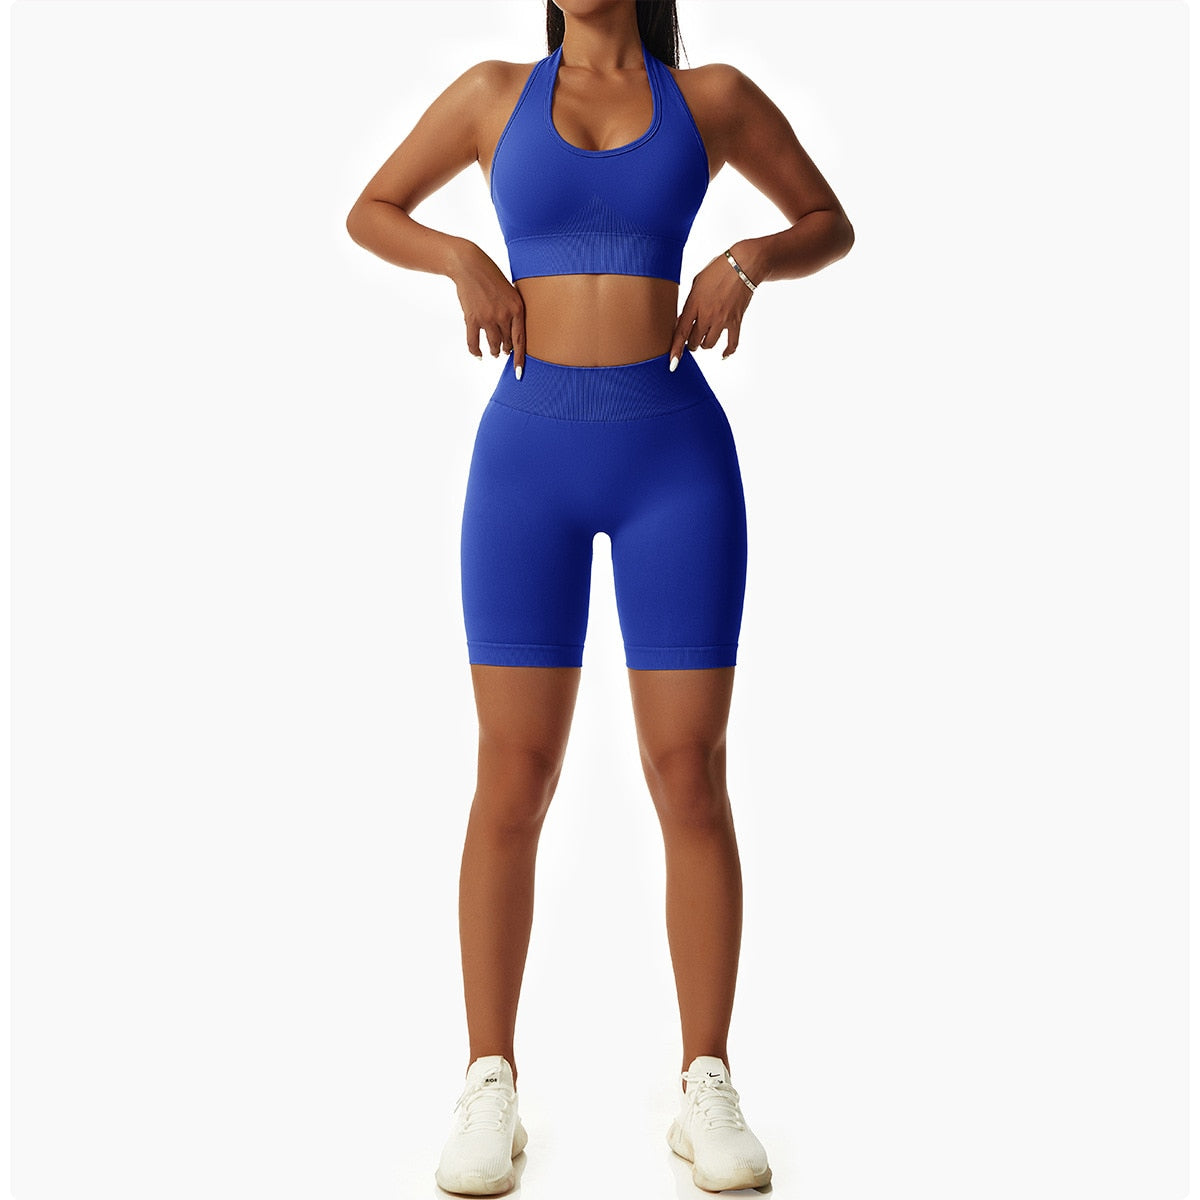 Seamless Women Sportswear Yoga Sets Workout Sports Bra Gym Clothing High Waist Legging Fitness Women Tracksuit Athletic Outfits The Clothing Company Sydney